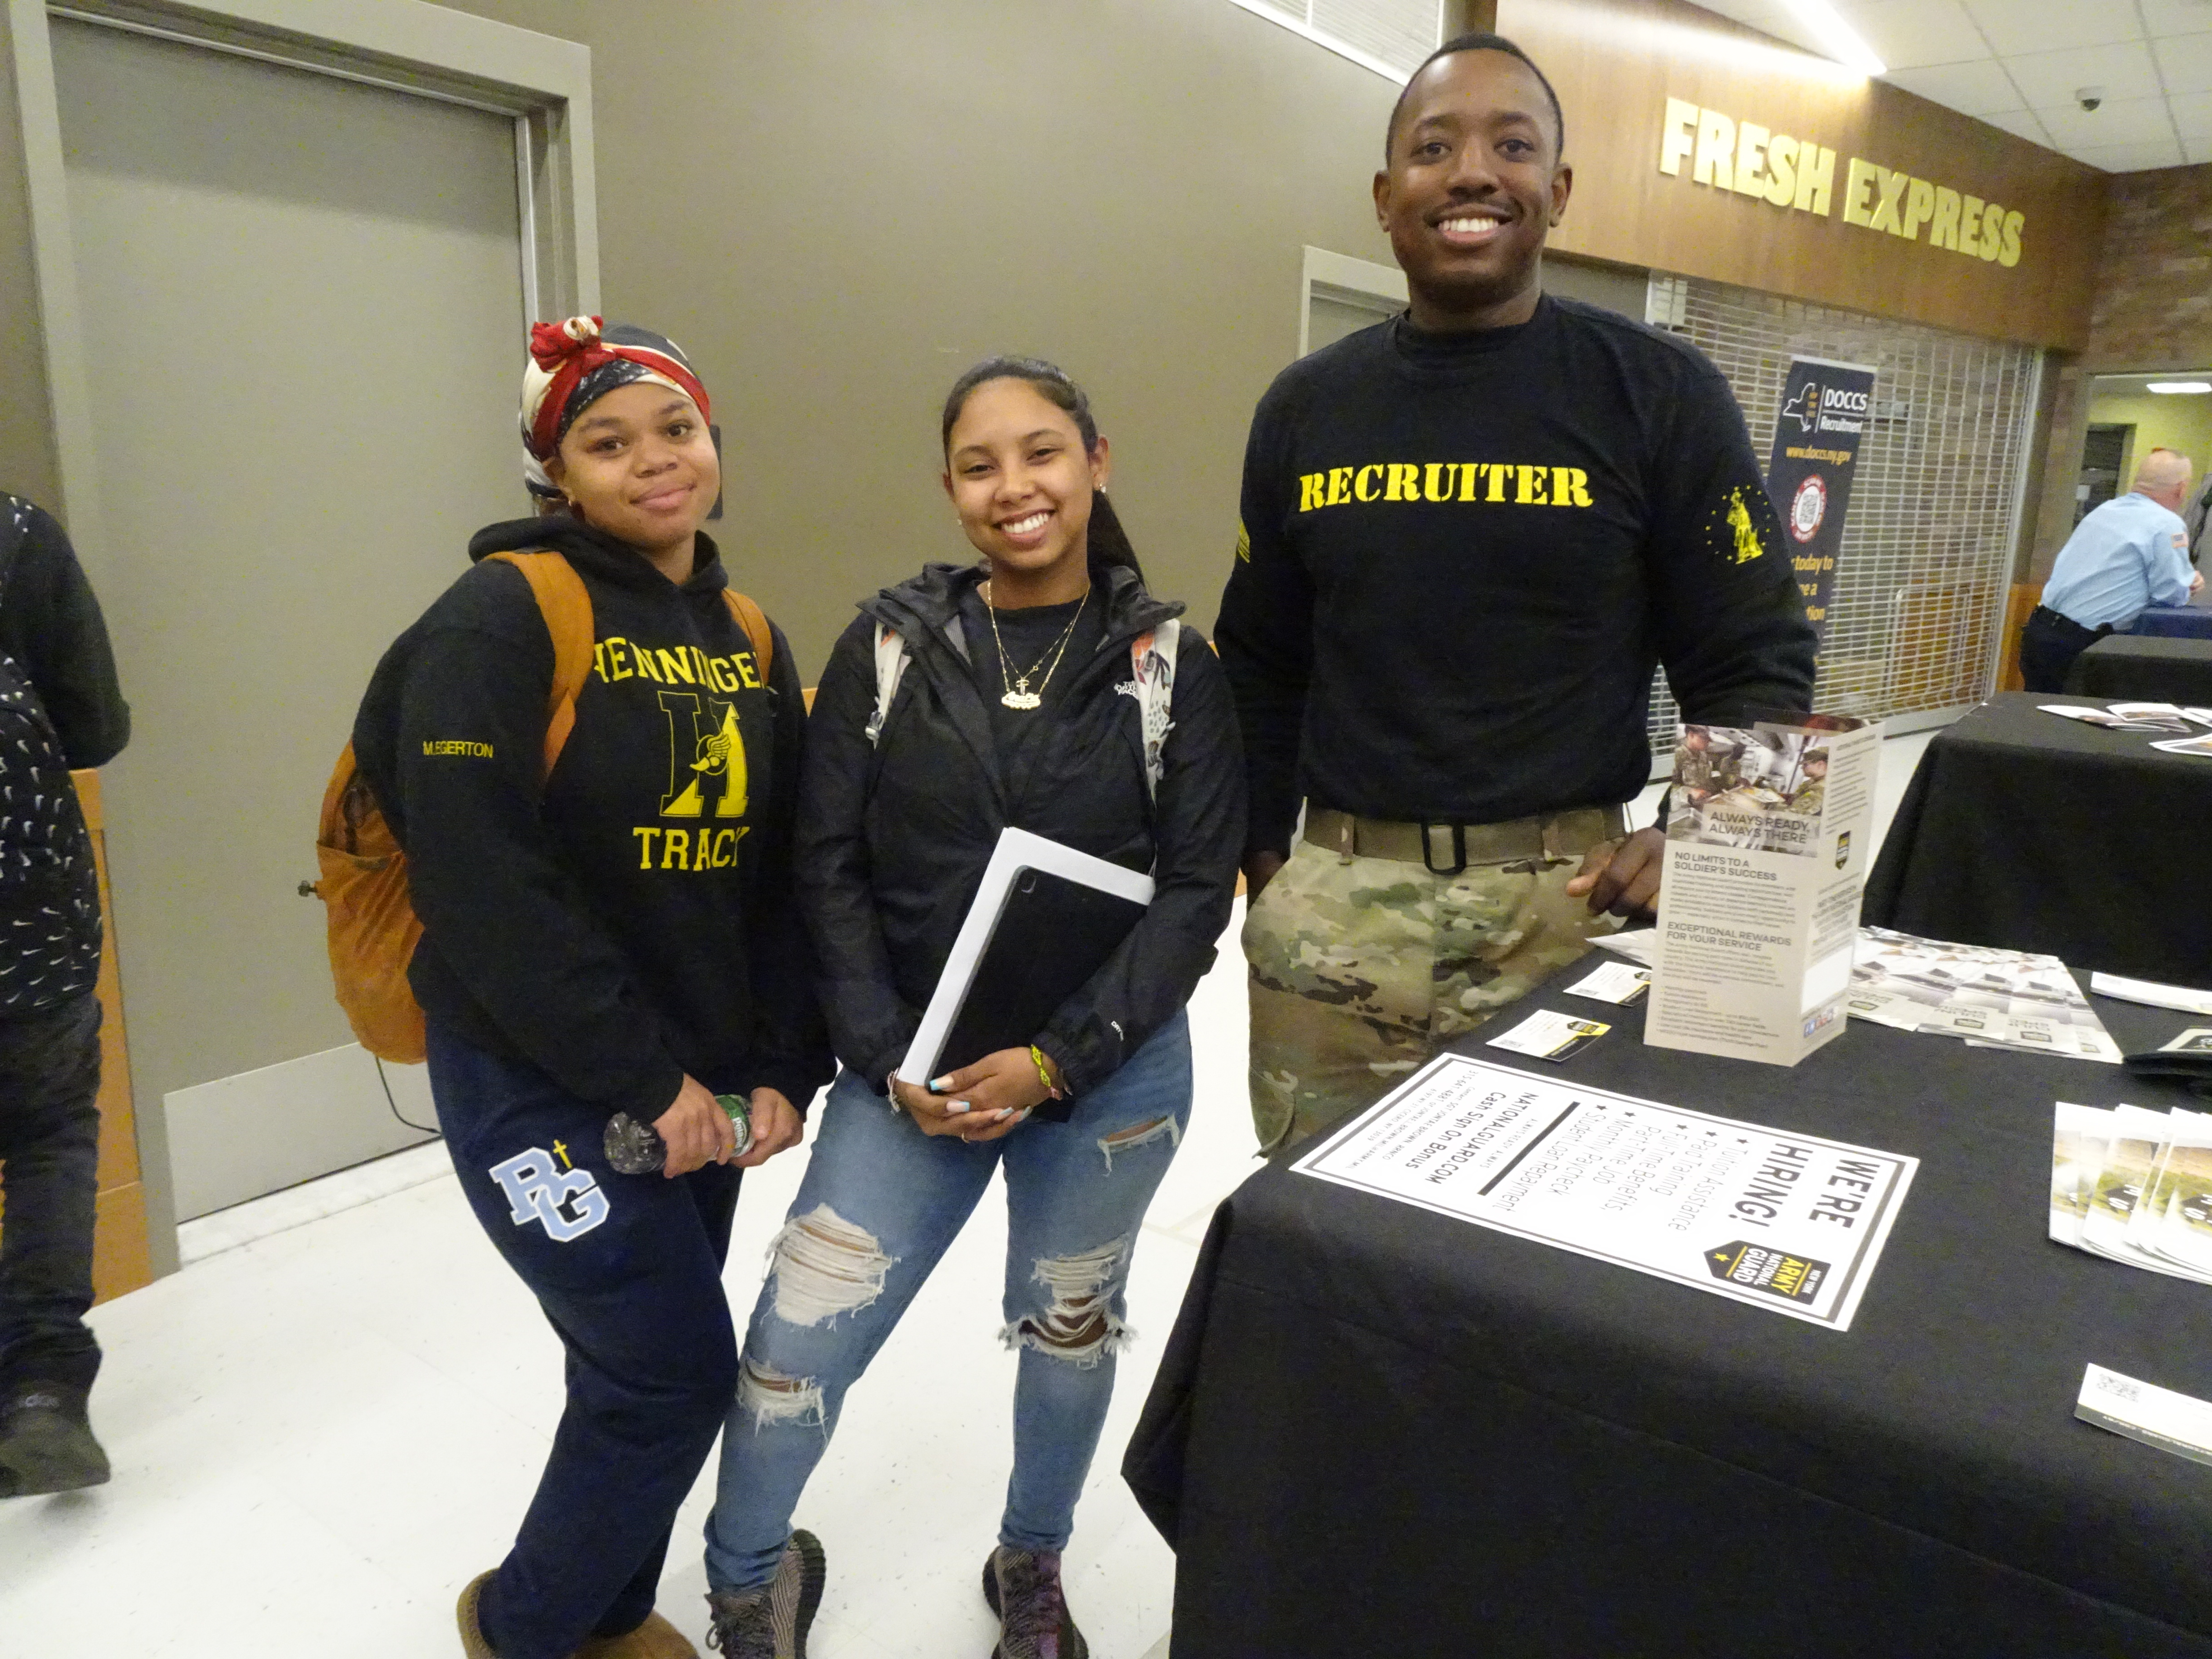 This is a photo of two Henninger students along with a recruiter, all smiling at the camera,  at the Henninger job fair.